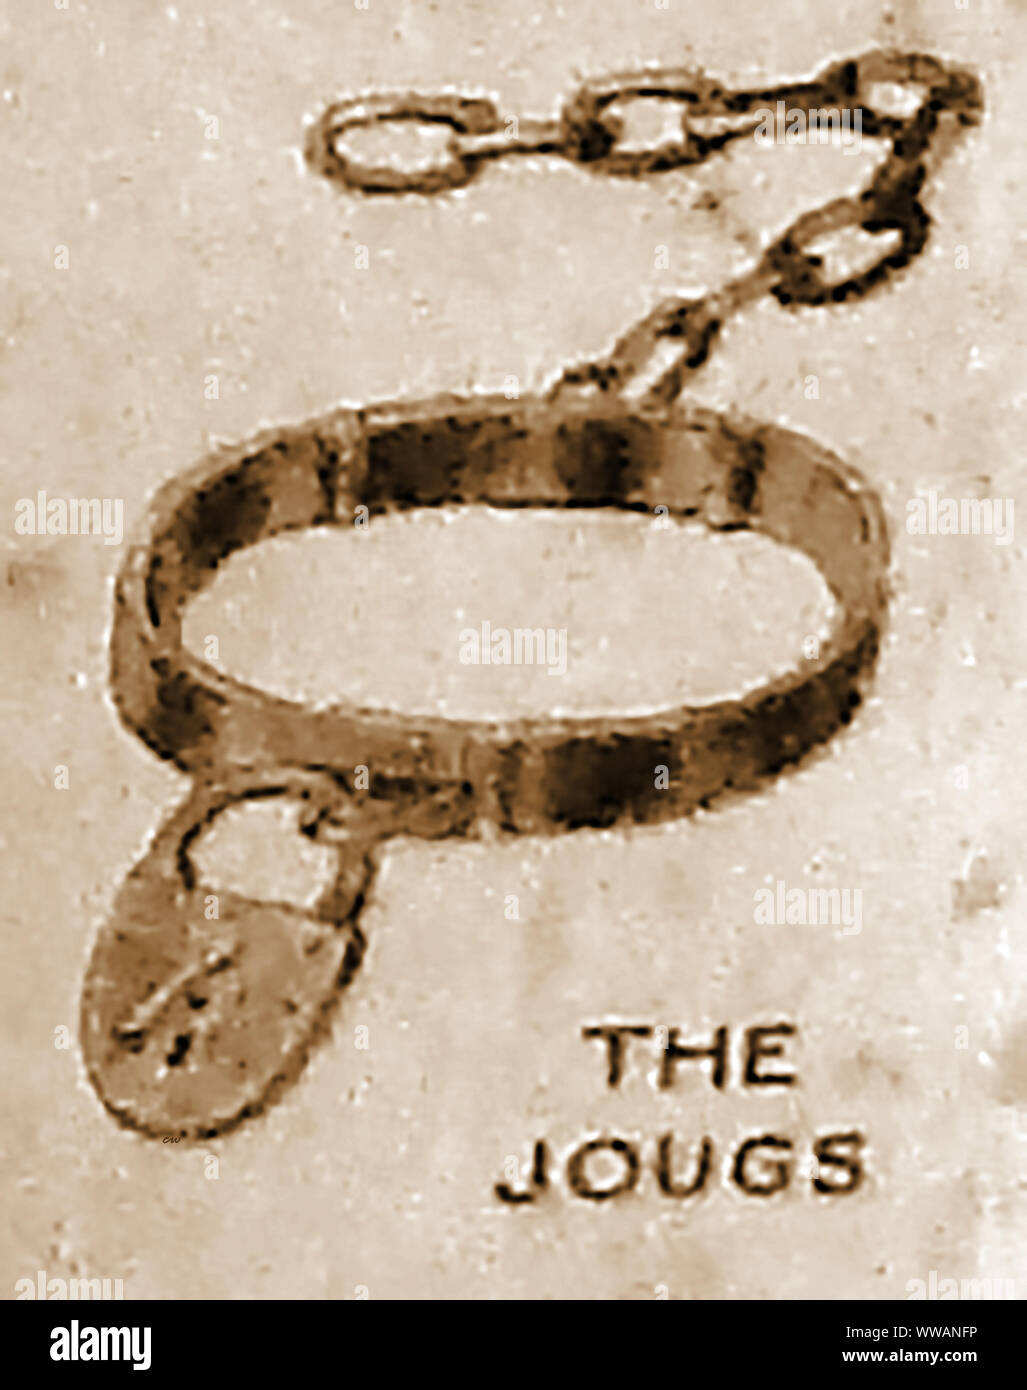 PUNISHMENTS & INSTRUMENTS OF TORTURE FROM THE PAST - The Jougs,  Juggs, or Joggs, a locked collar  with a short chain for attaching a petty prisoner to a tree, wall, boat interior etc. Sometimes used for slaves and used in Scotland in place of a public pillory for humiliation of an offender. Stock Photo